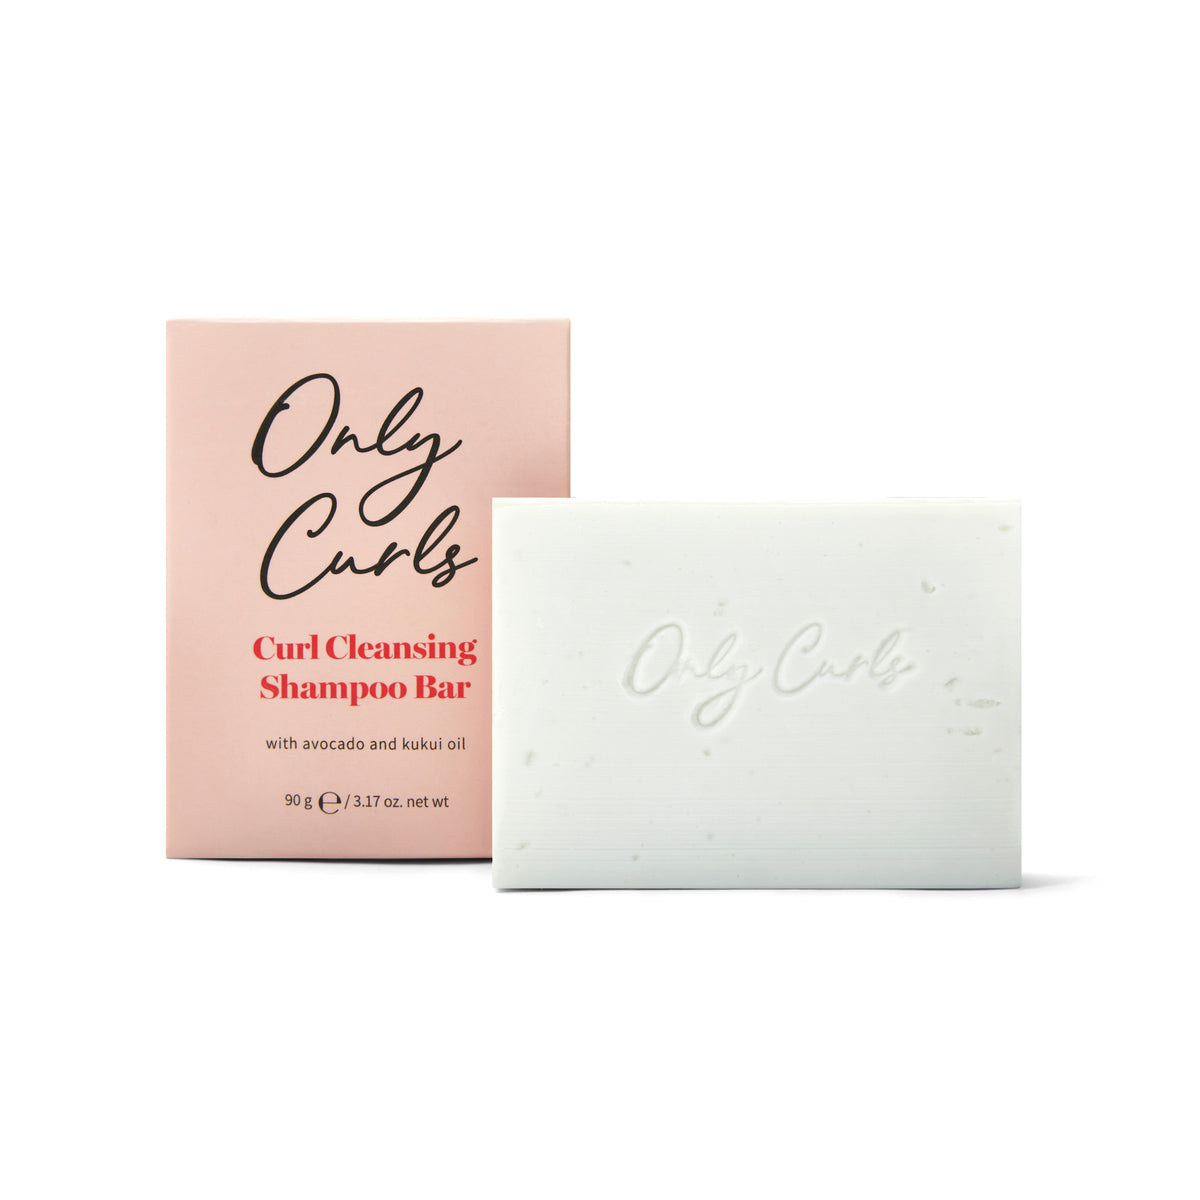 Only Curls Curl Cleansing Shampoo Bar and Box